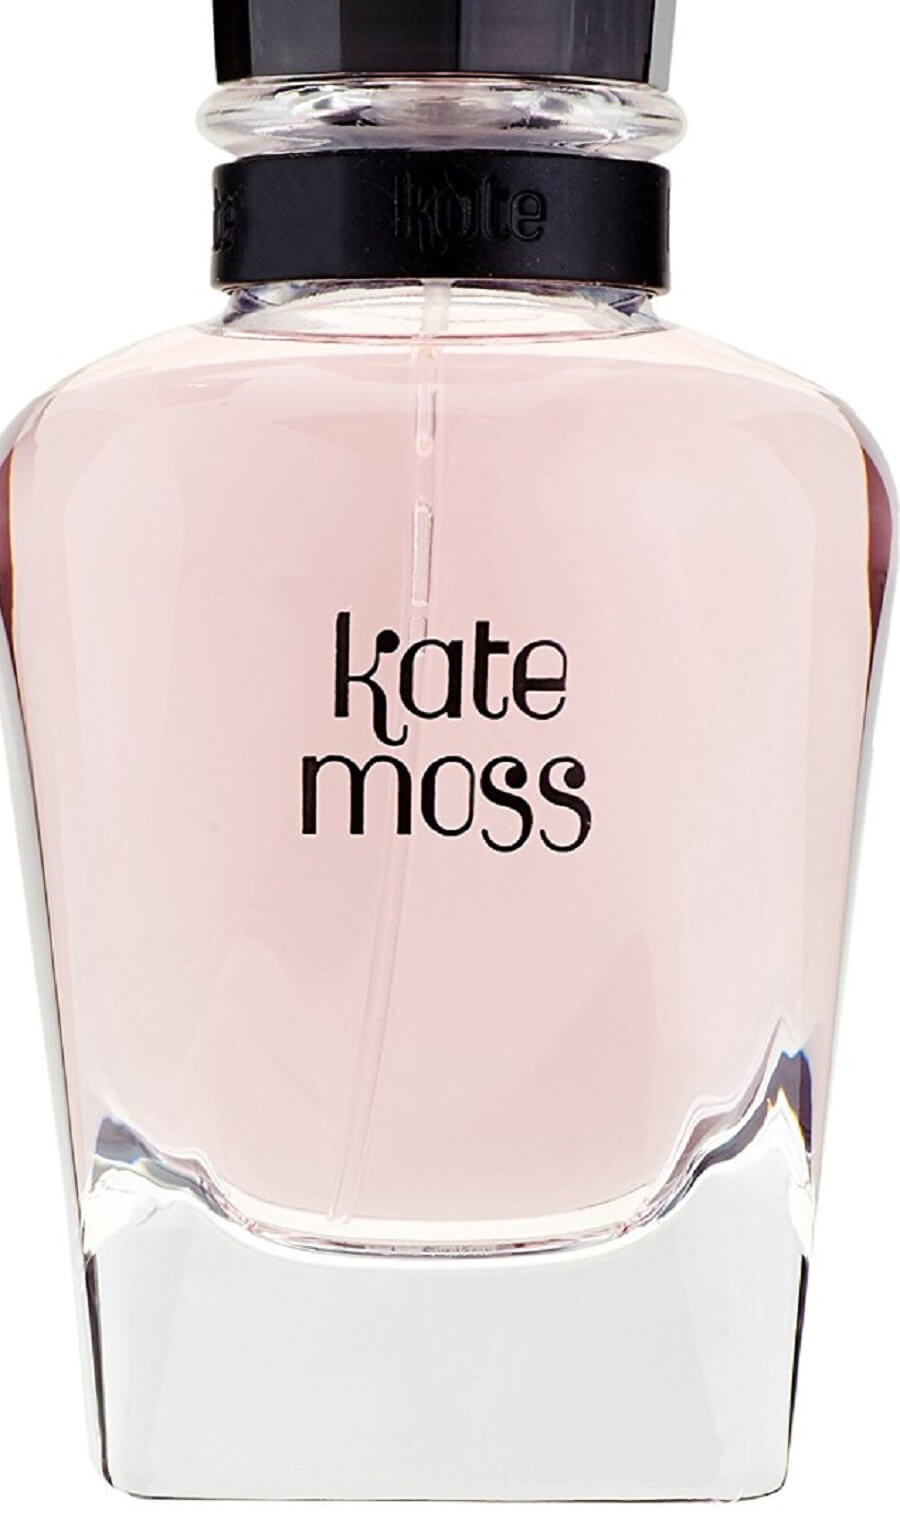 First Launched Kate Moss Perfume